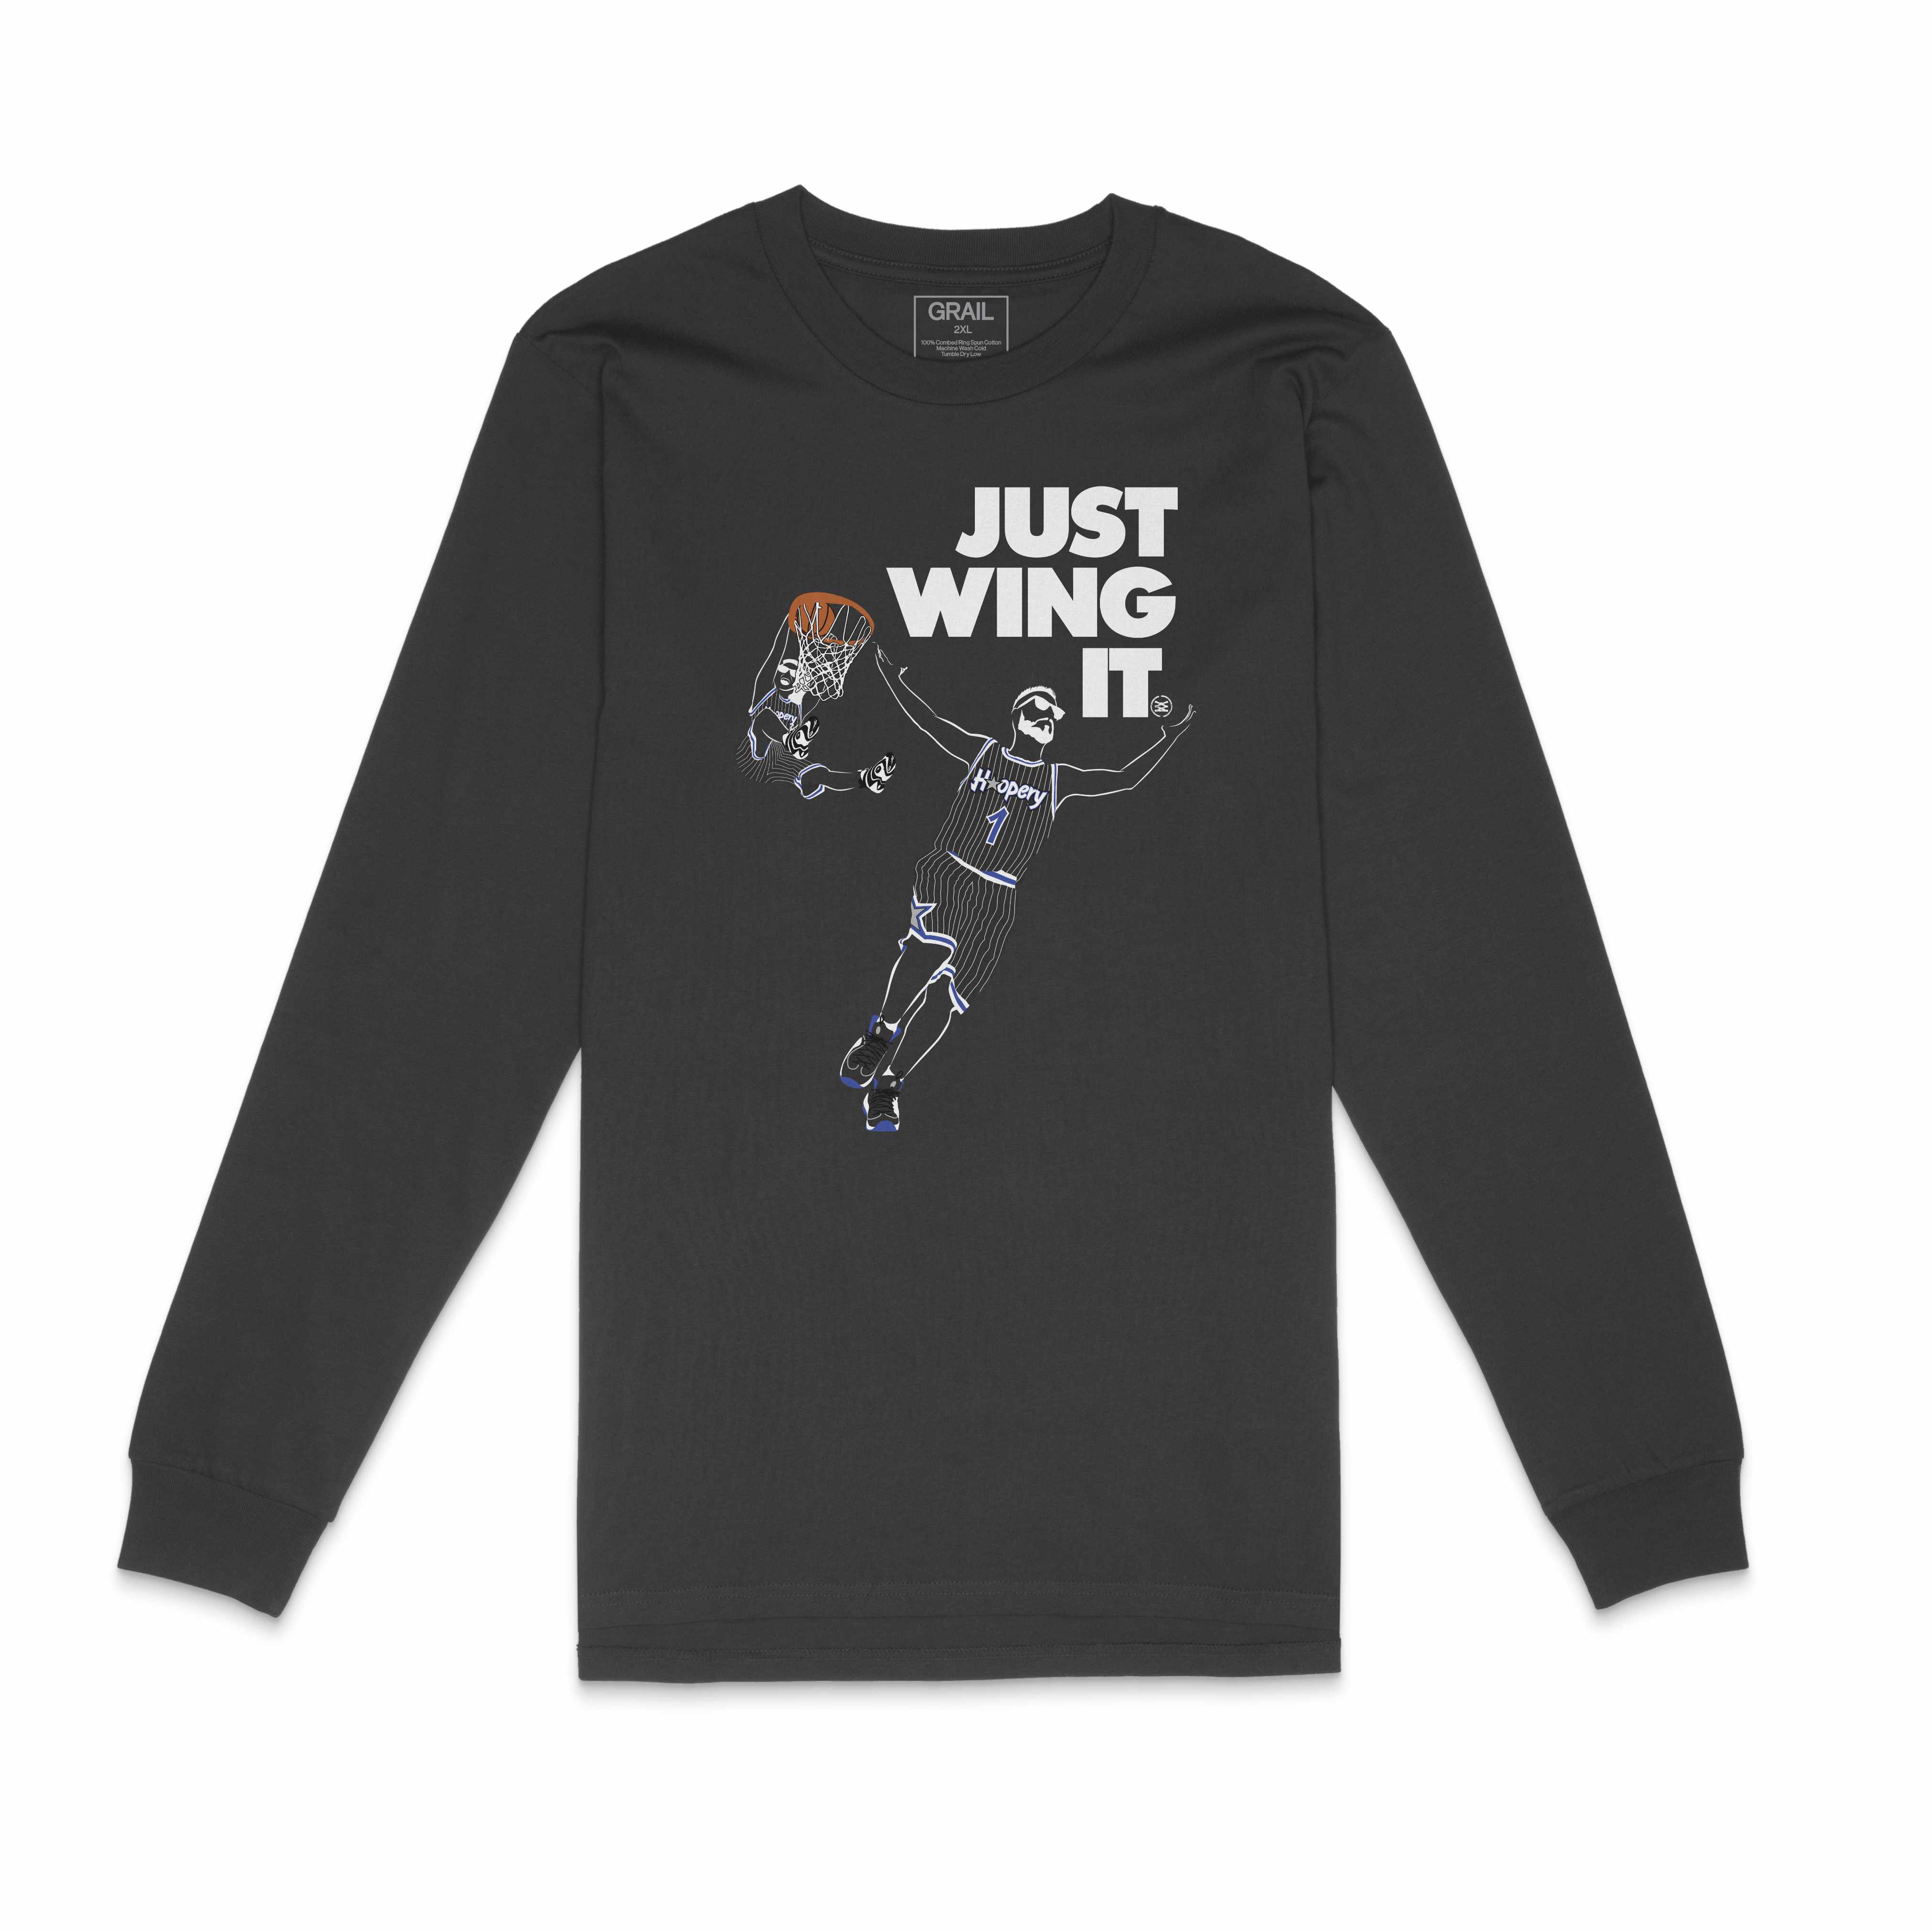 Grail X Nightwing X Hoopery Collab | Just Wing It L/S Tee | Collaboration | Sneaker Match | Jordan Matching Outfits